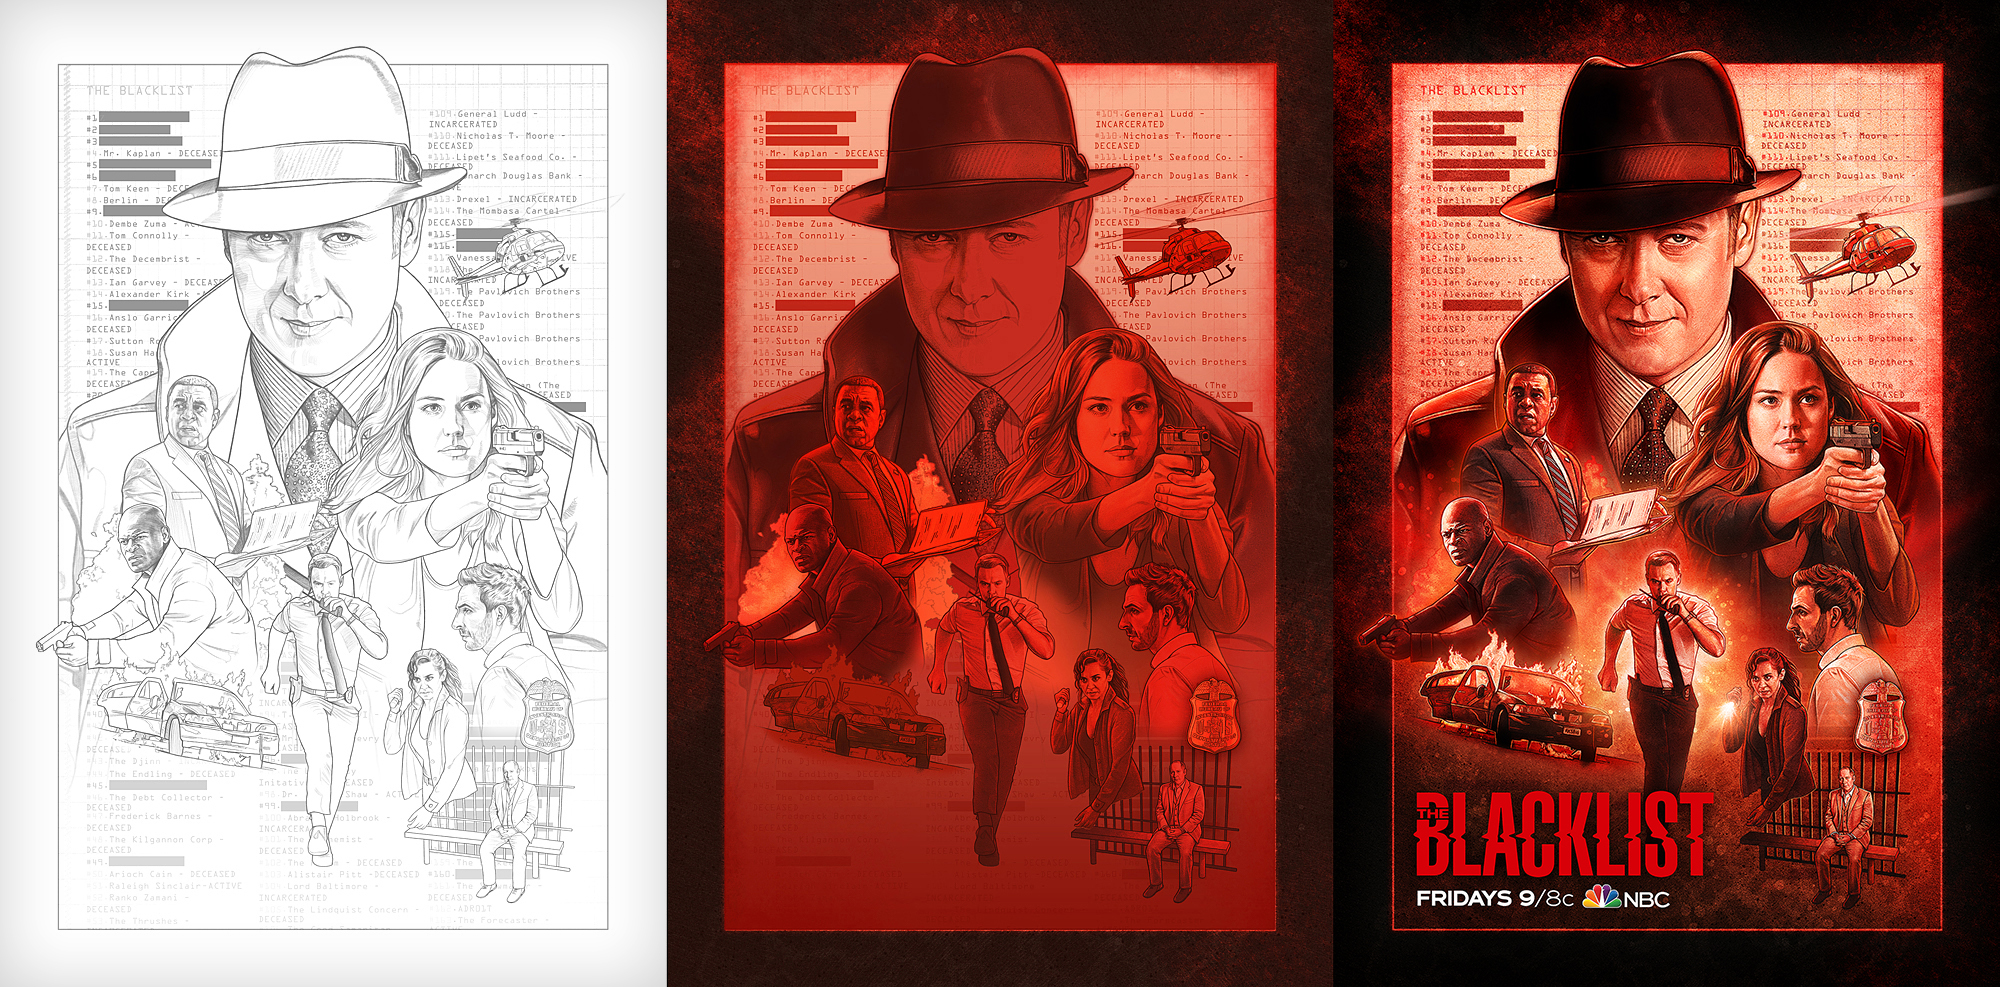 The Blacklist Season 6 Poster Stages by Kyle Lambert